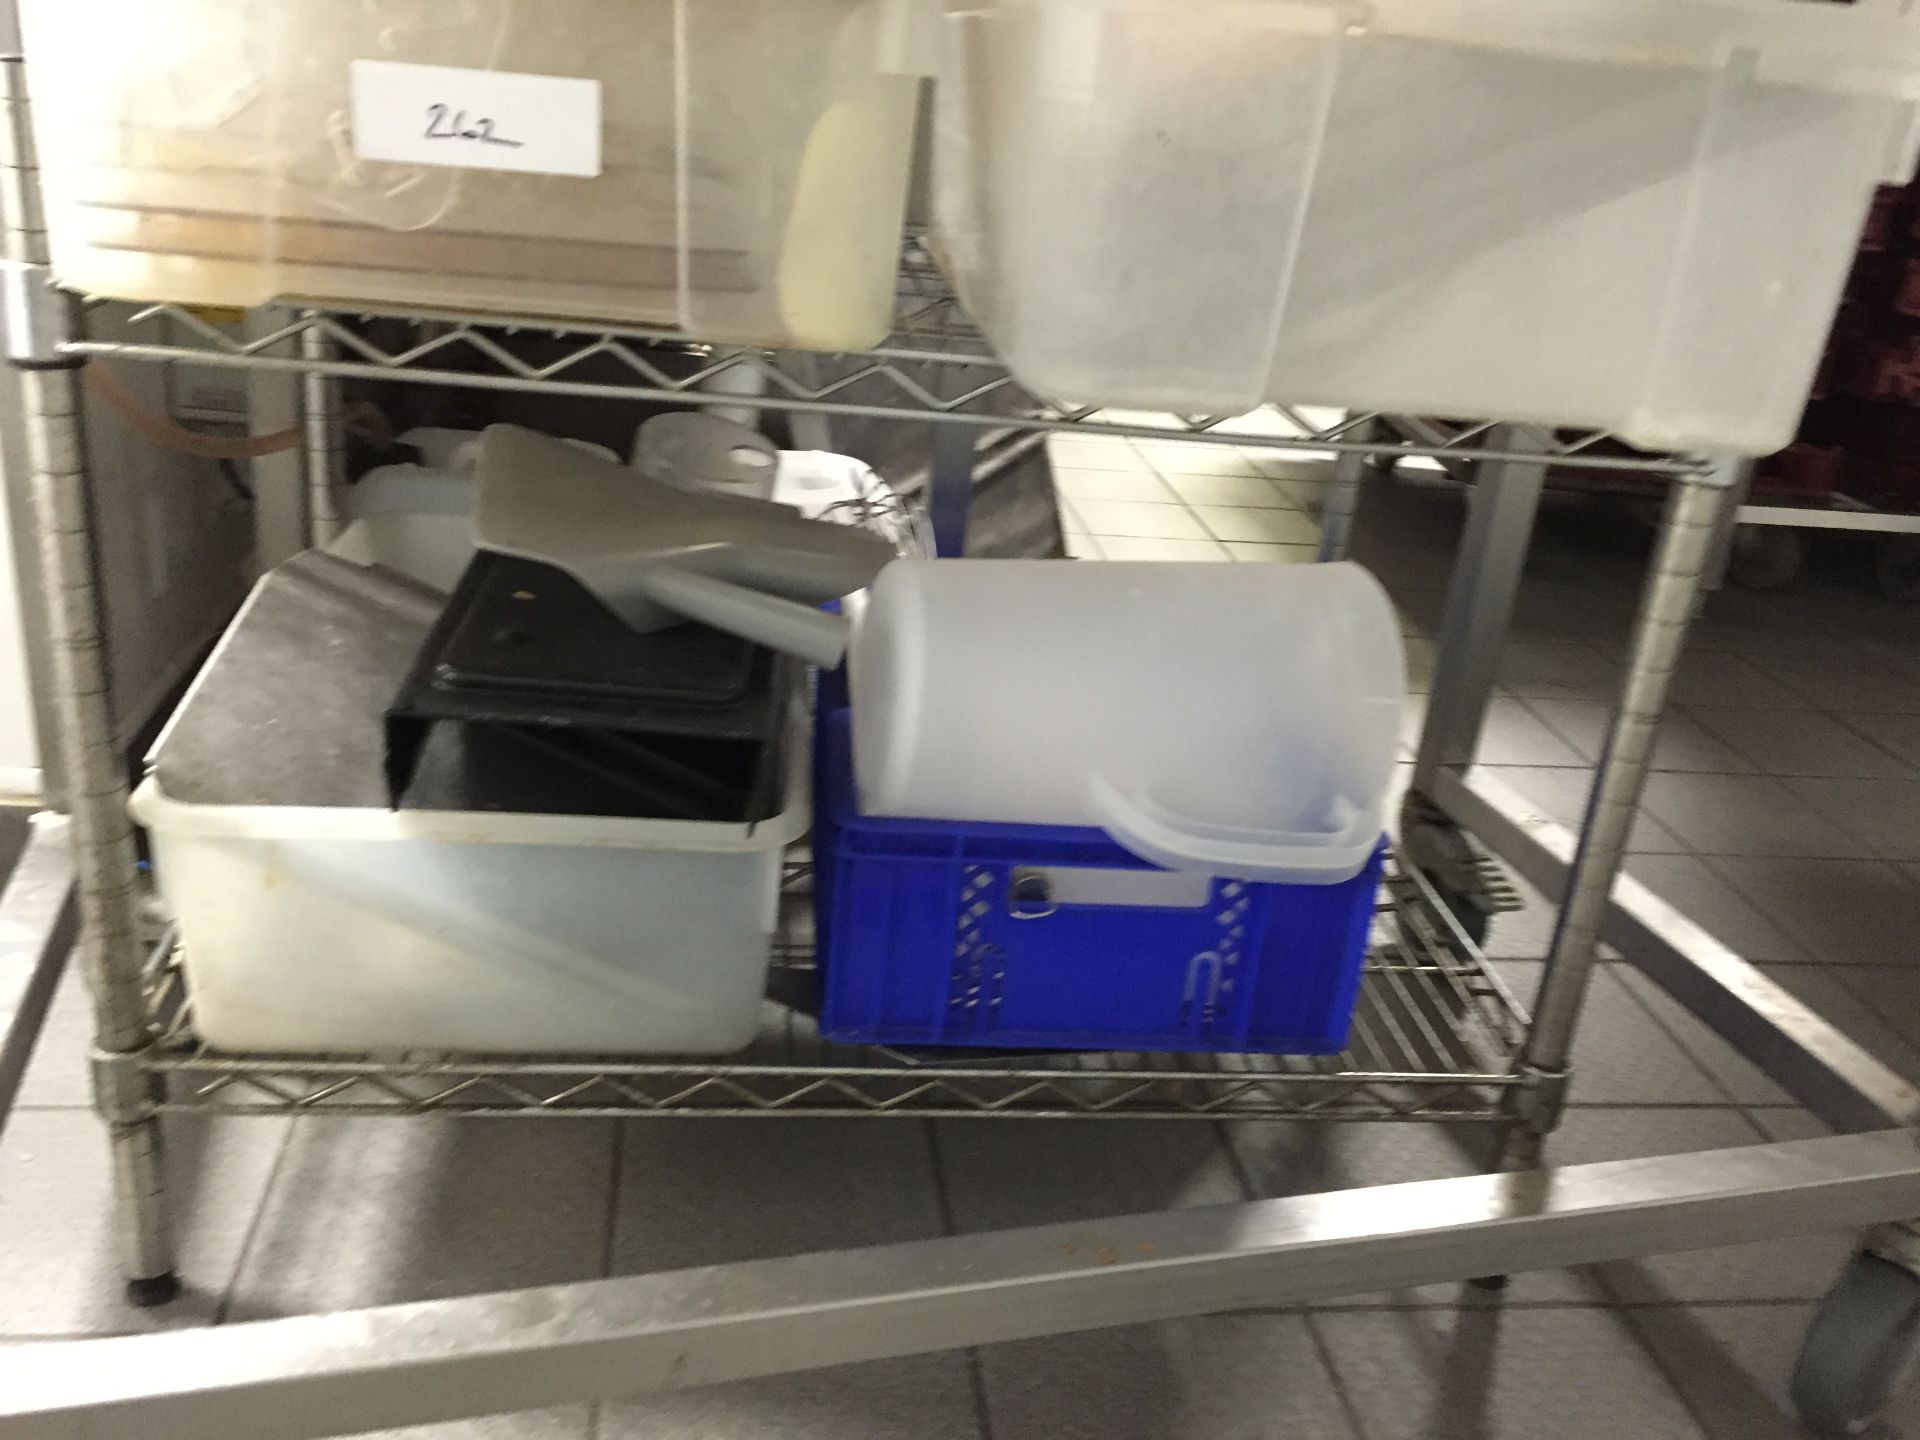 1 x Commercial Catering Wire Storage Shelf Contents not included - Two Tier - H62 x W100 x D40cm - Image 2 of 2